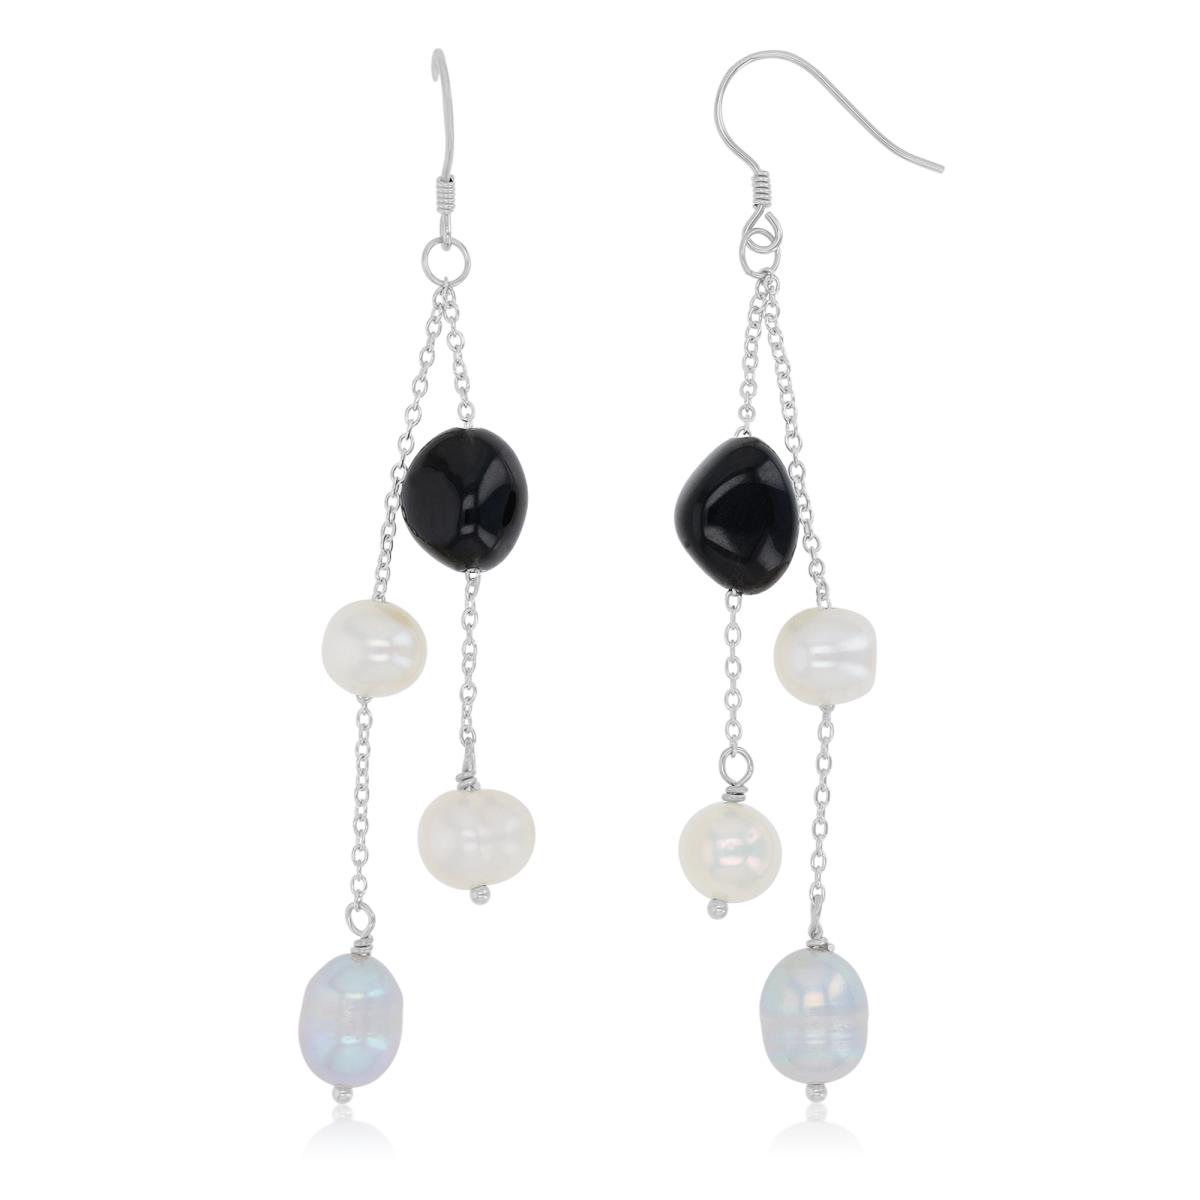 Sterling Silver Rhodium 73mm Dangling With White Freshwater 7-8mm Potato Pearl & 8-10mm Black Onyx Fish Hook Earring